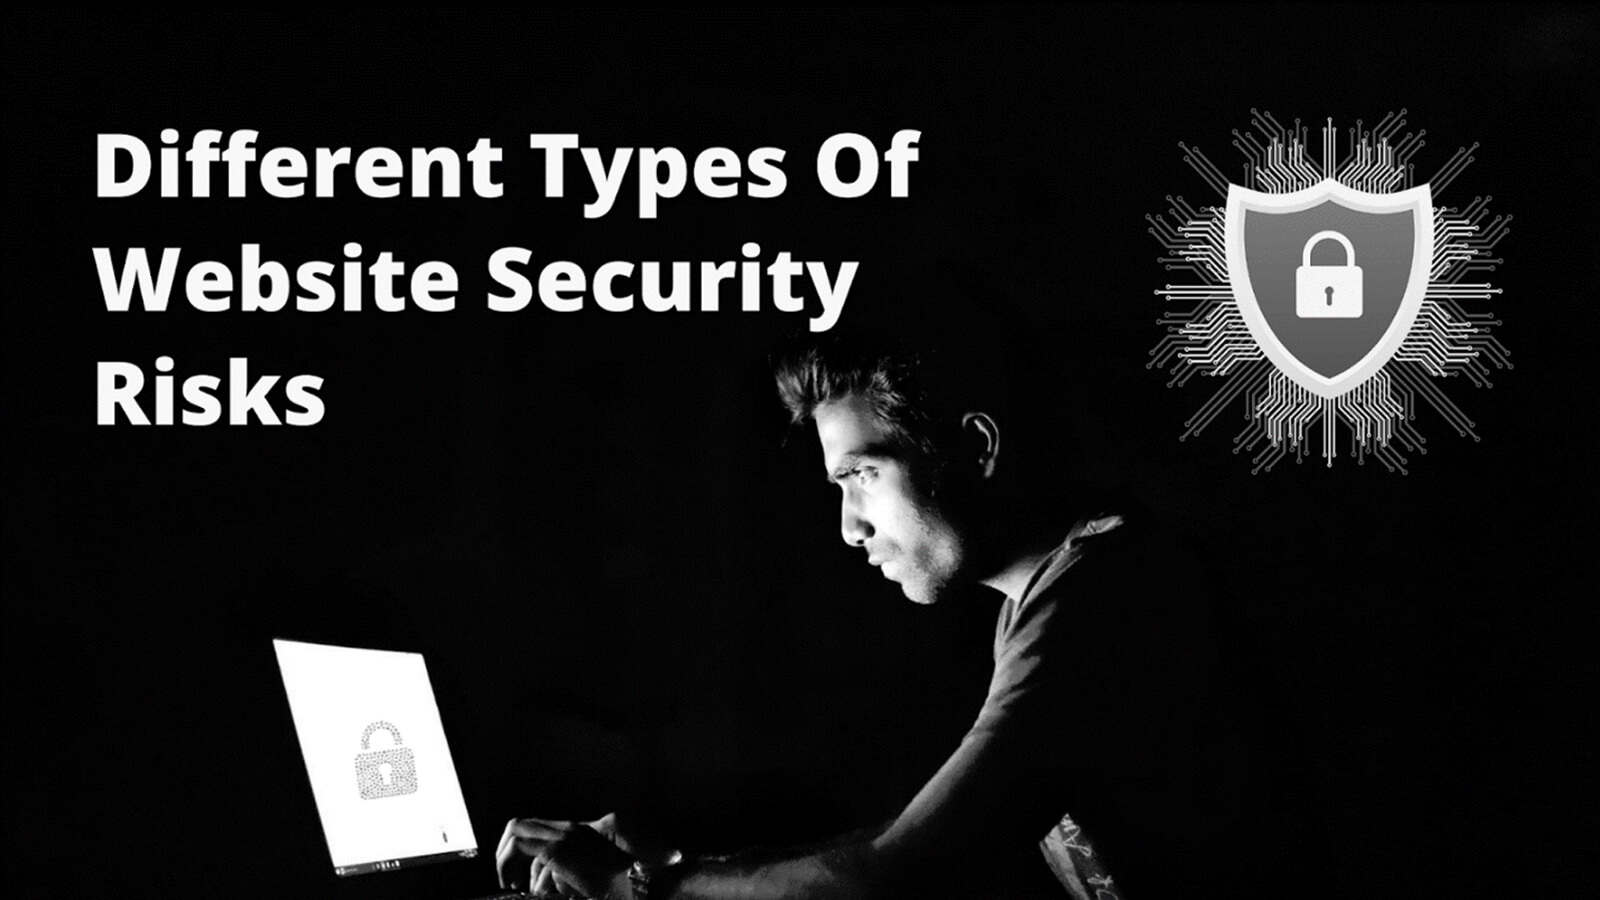 Different Types of Website Security Risks